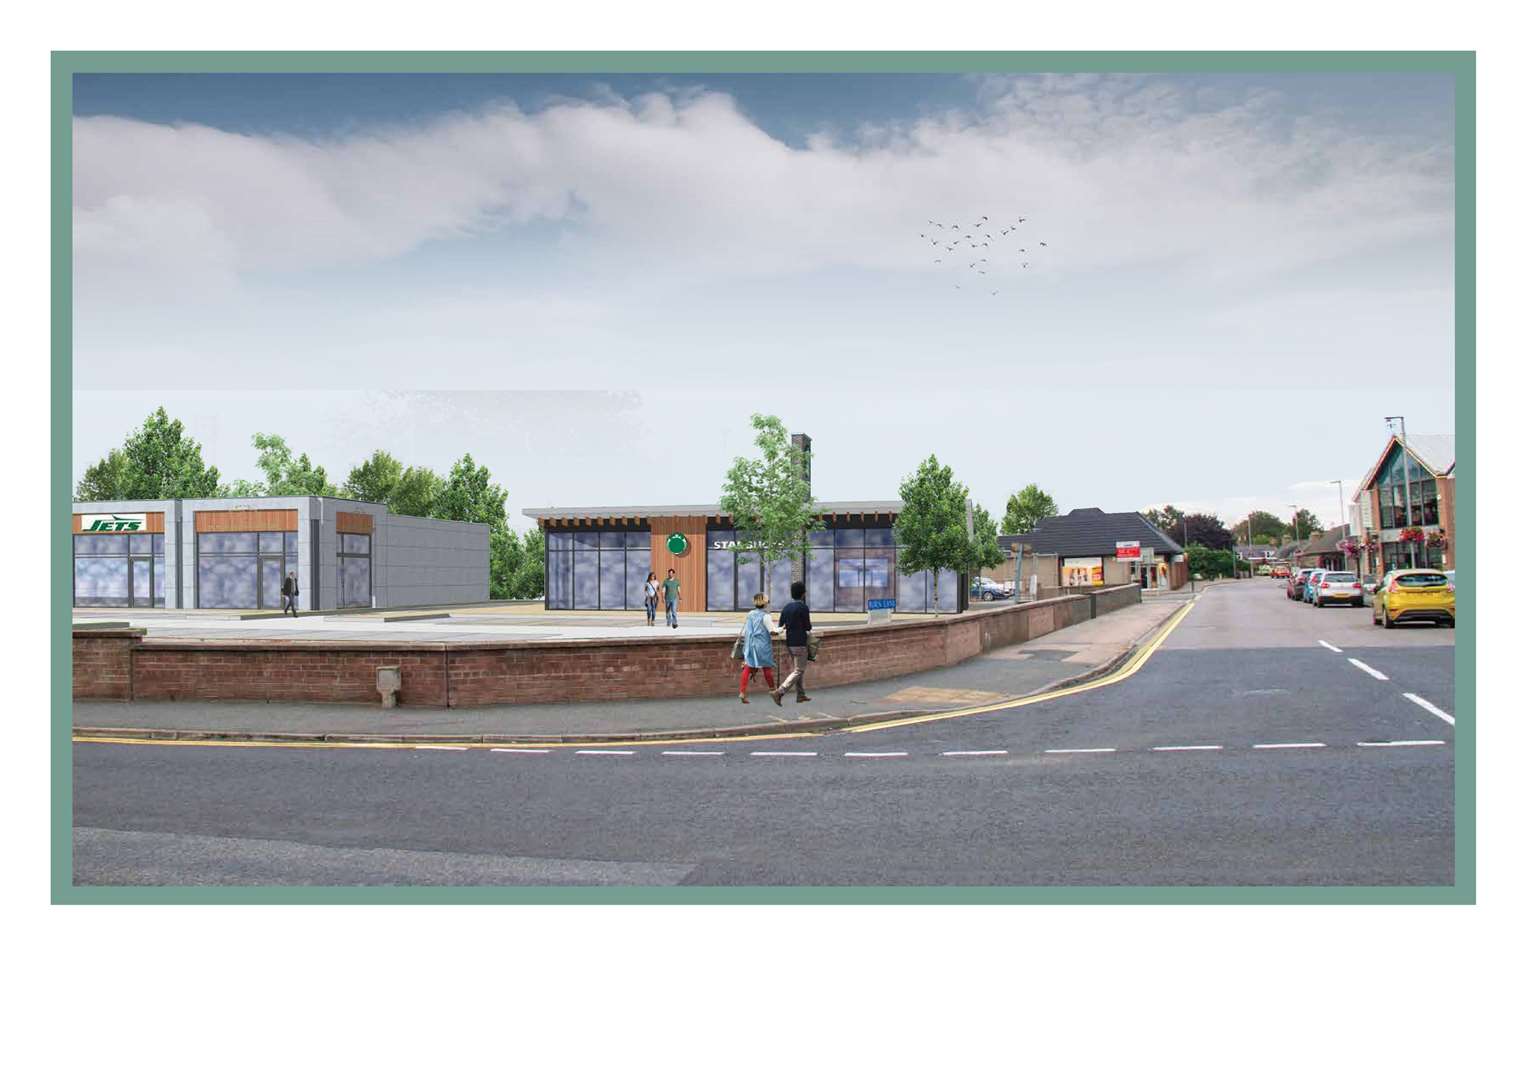 An illustrative image of the proposed new units on Burn Lane in Inverurie.